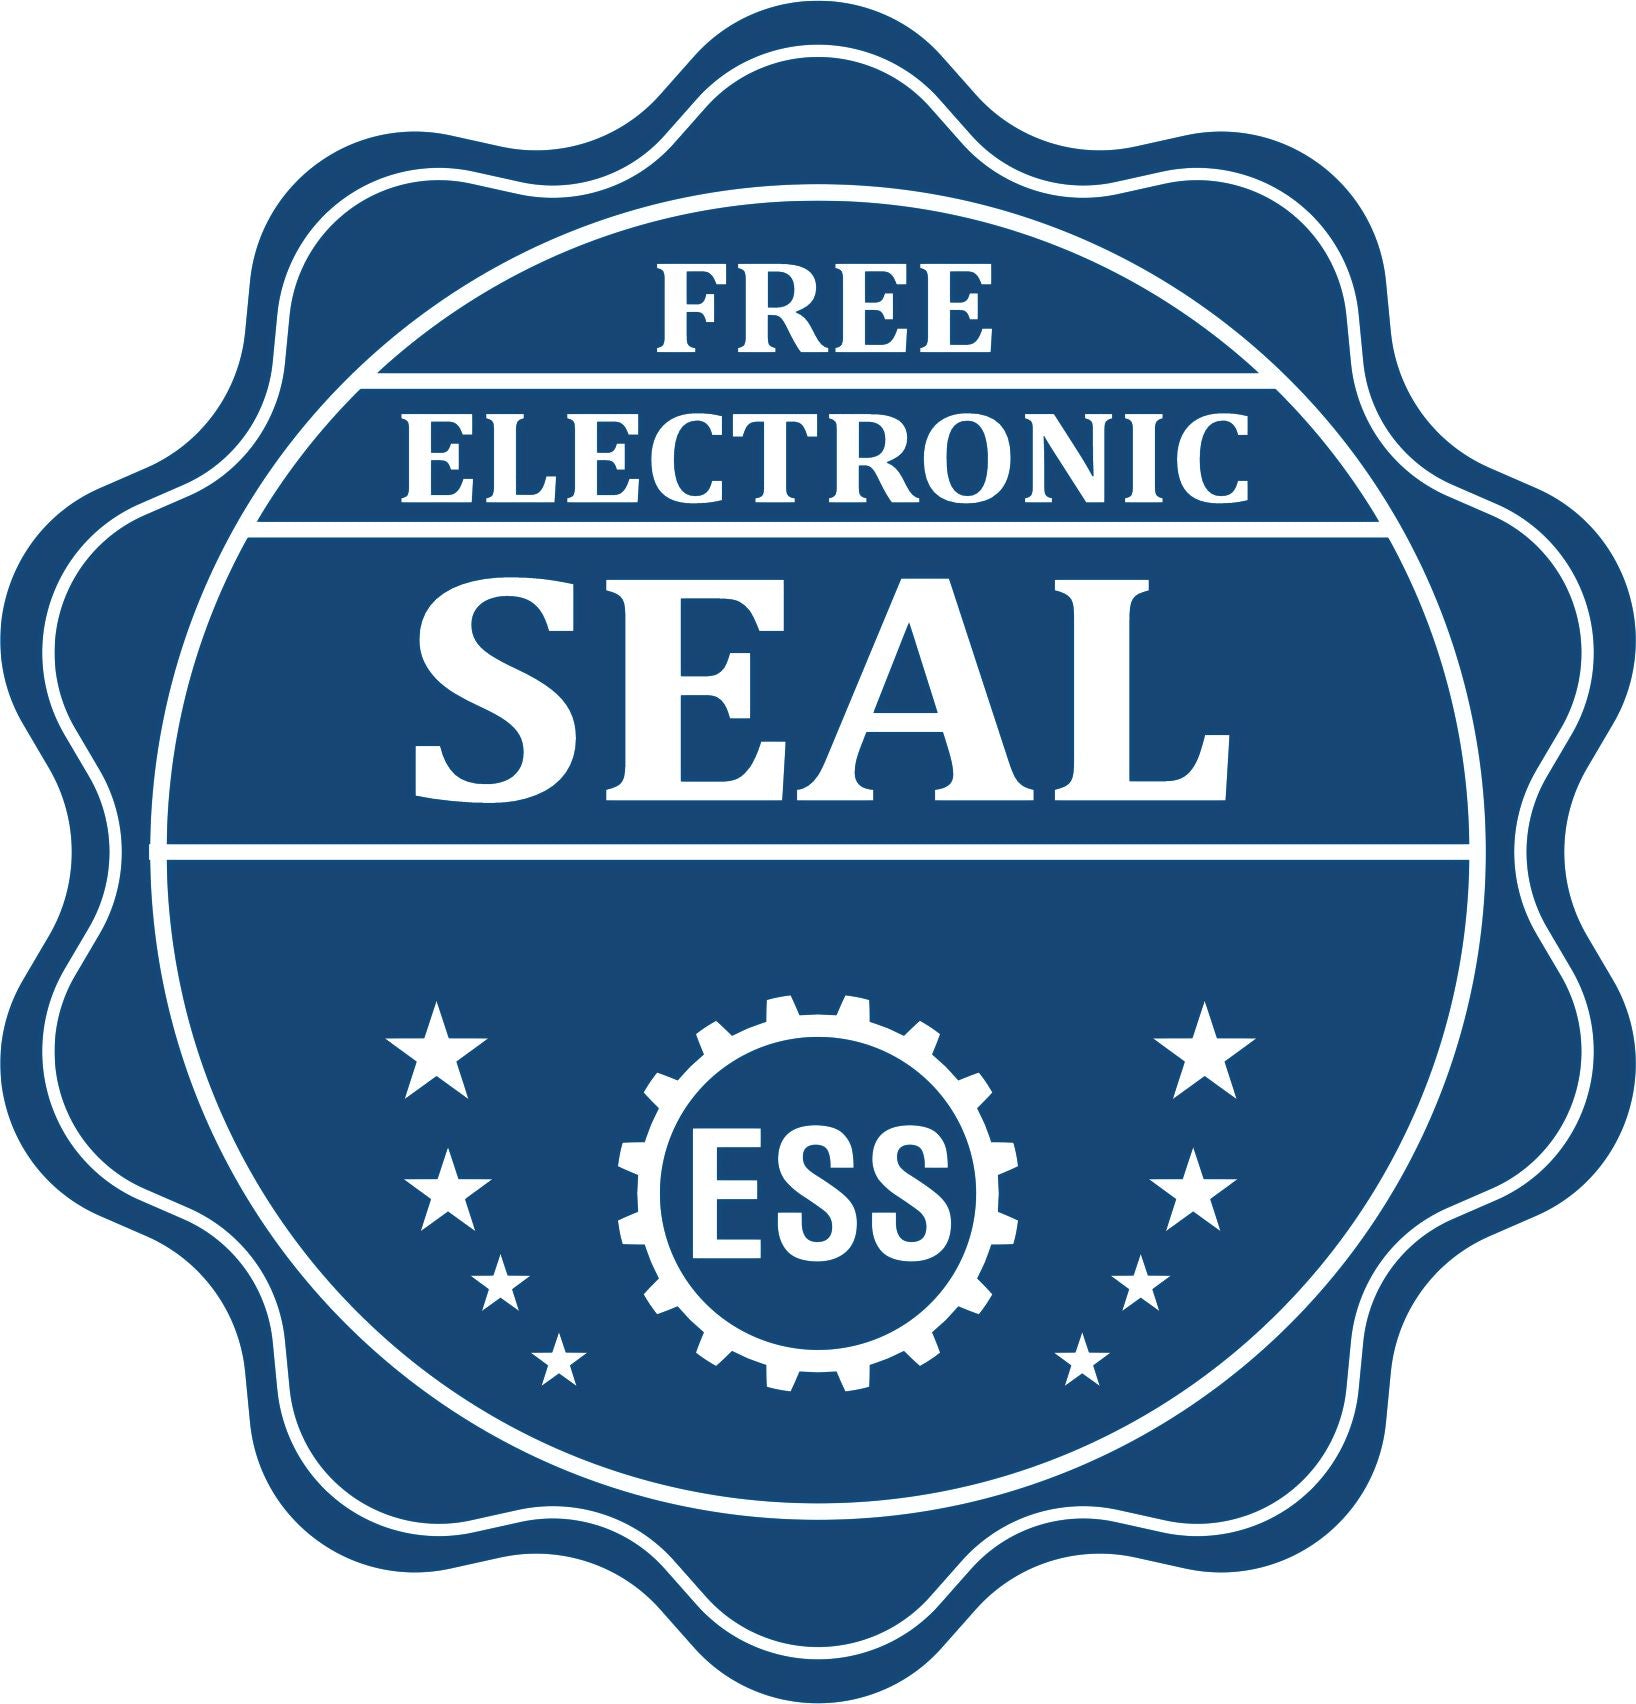 A badge showing a free electronic seal for the Slim Pre-Inked Washington Land Surveyor Seal Stamp with stars and the ESS gear on the emblem.